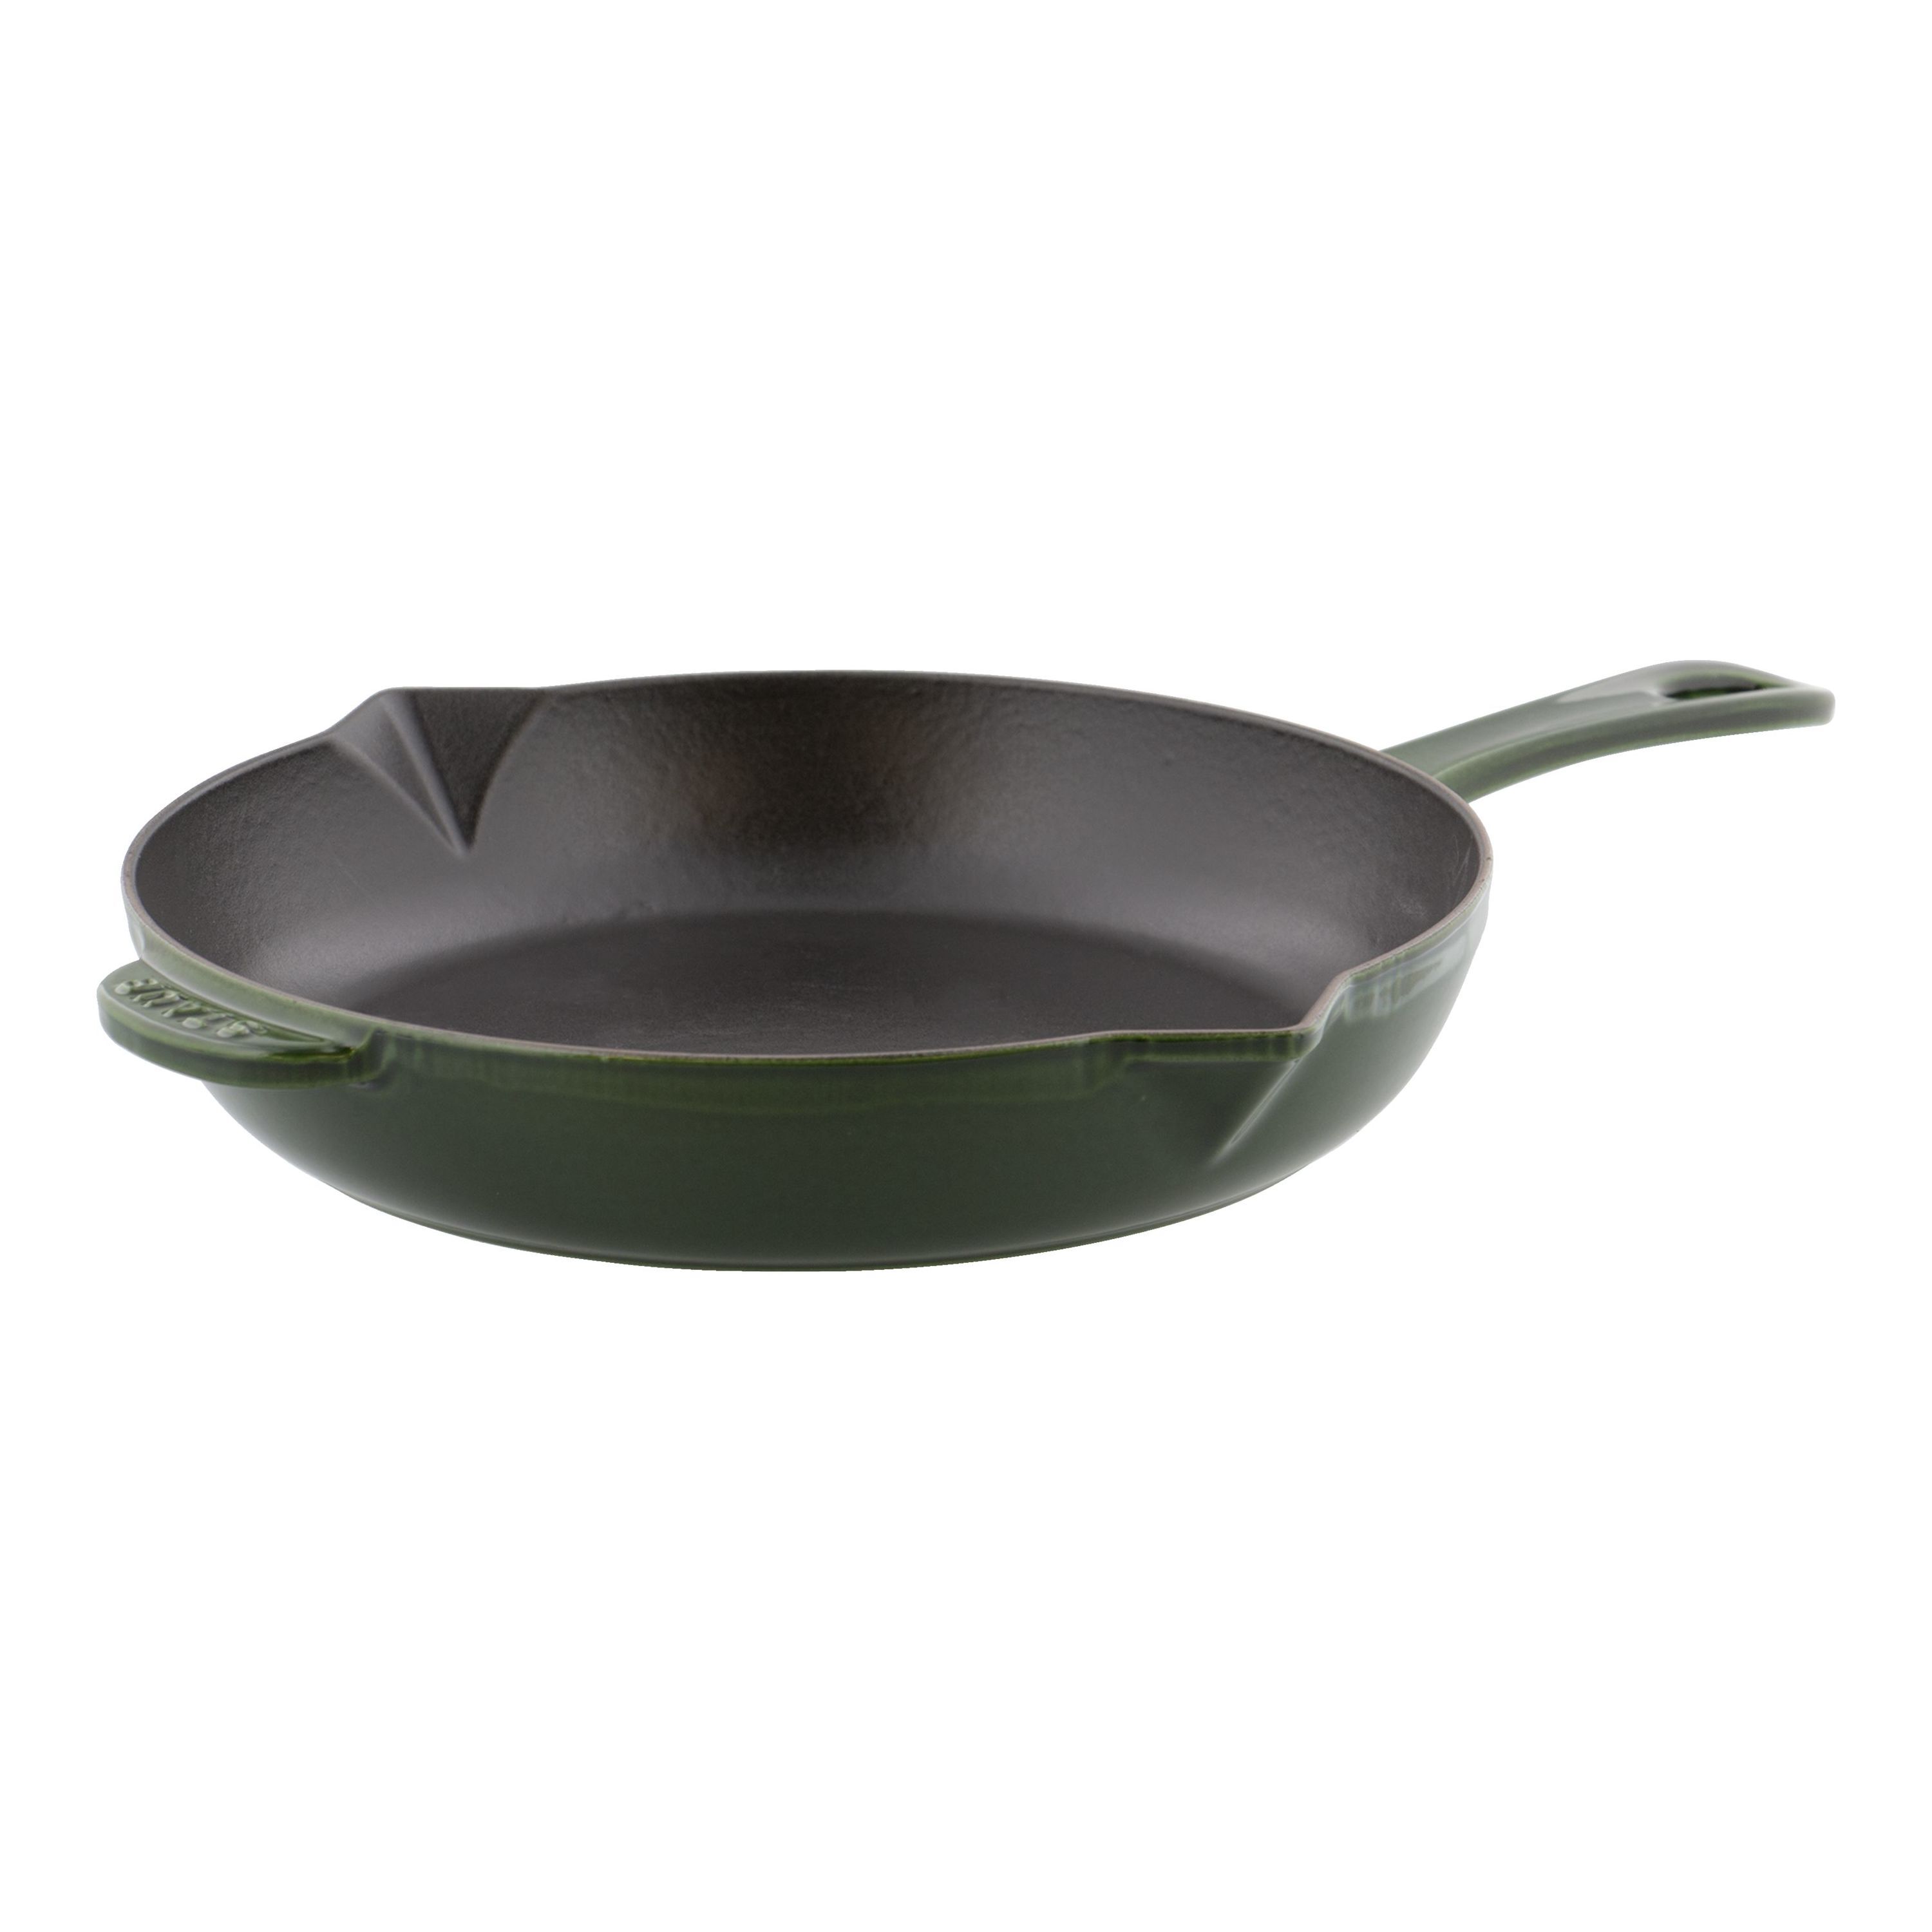 10 inch fry pan cover